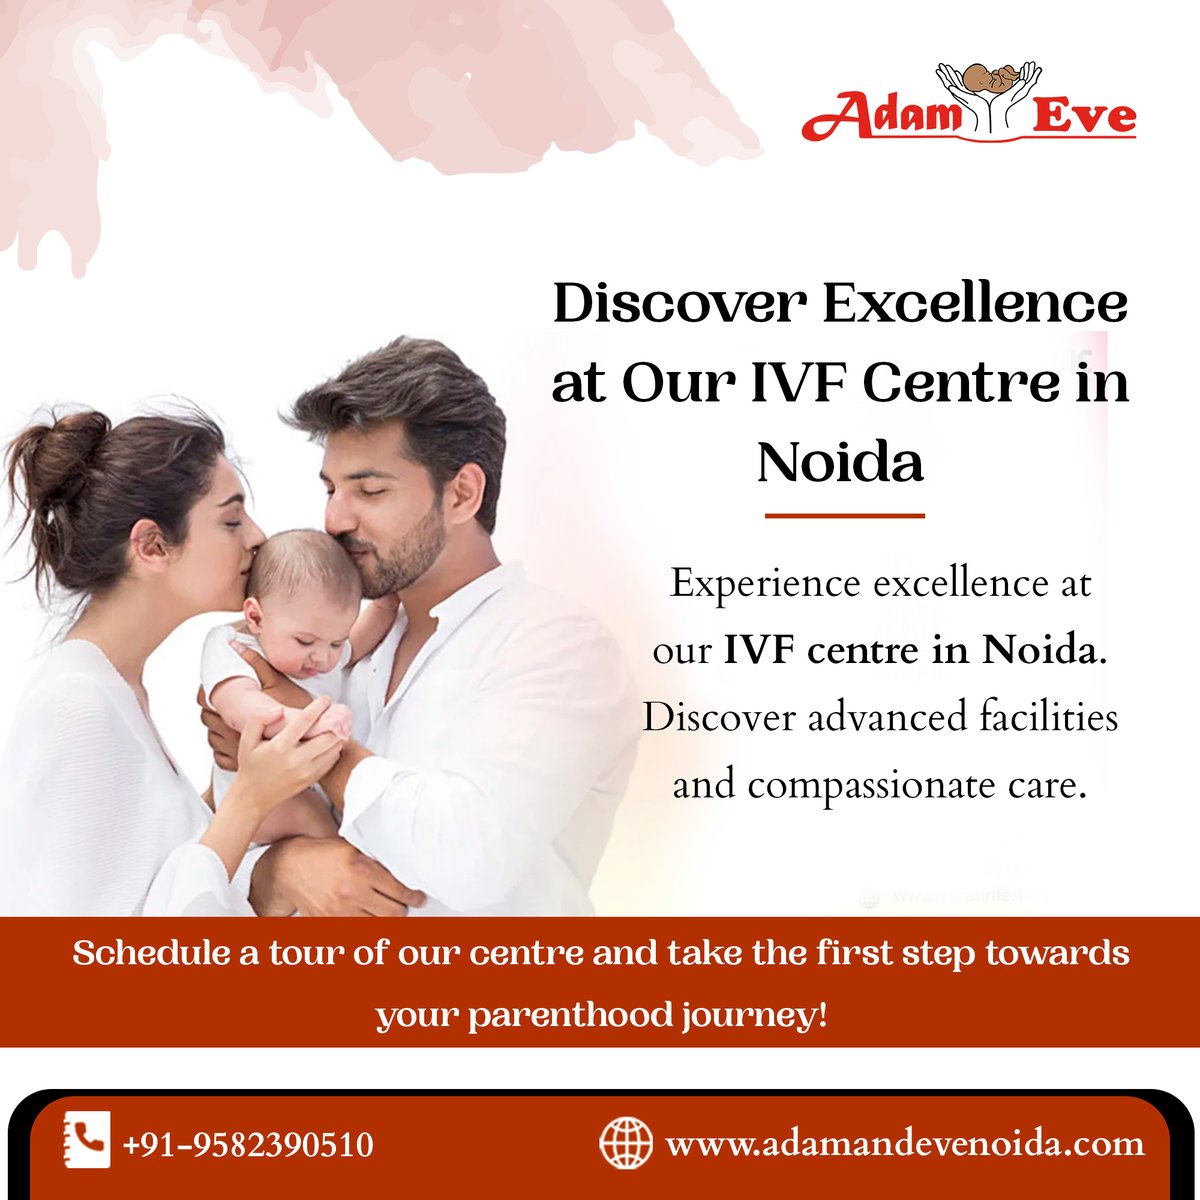 Transforming dreams into reality, one step at a time with IVF treatment at Adam and Eve Noida.🌟
𝗕𝗼𝗼𝗸 𝗬𝗼𝘂𝗿 𝗙𝗶𝗿𝘀𝘁 𝗙𝗿𝗲𝗲 𝗔𝗽𝗽𝗼𝗶𝗻𝘁𝗺𝗲𝗻𝘁:
𝗖𝗮𝗹𝗹 +𝟵𝟭-𝟳𝟲𝟲𝟵𝟴𝟬𝟱𝟲𝟬𝟬
#IVFSuccess #AdamAndEveNoida #FertilityTreatment